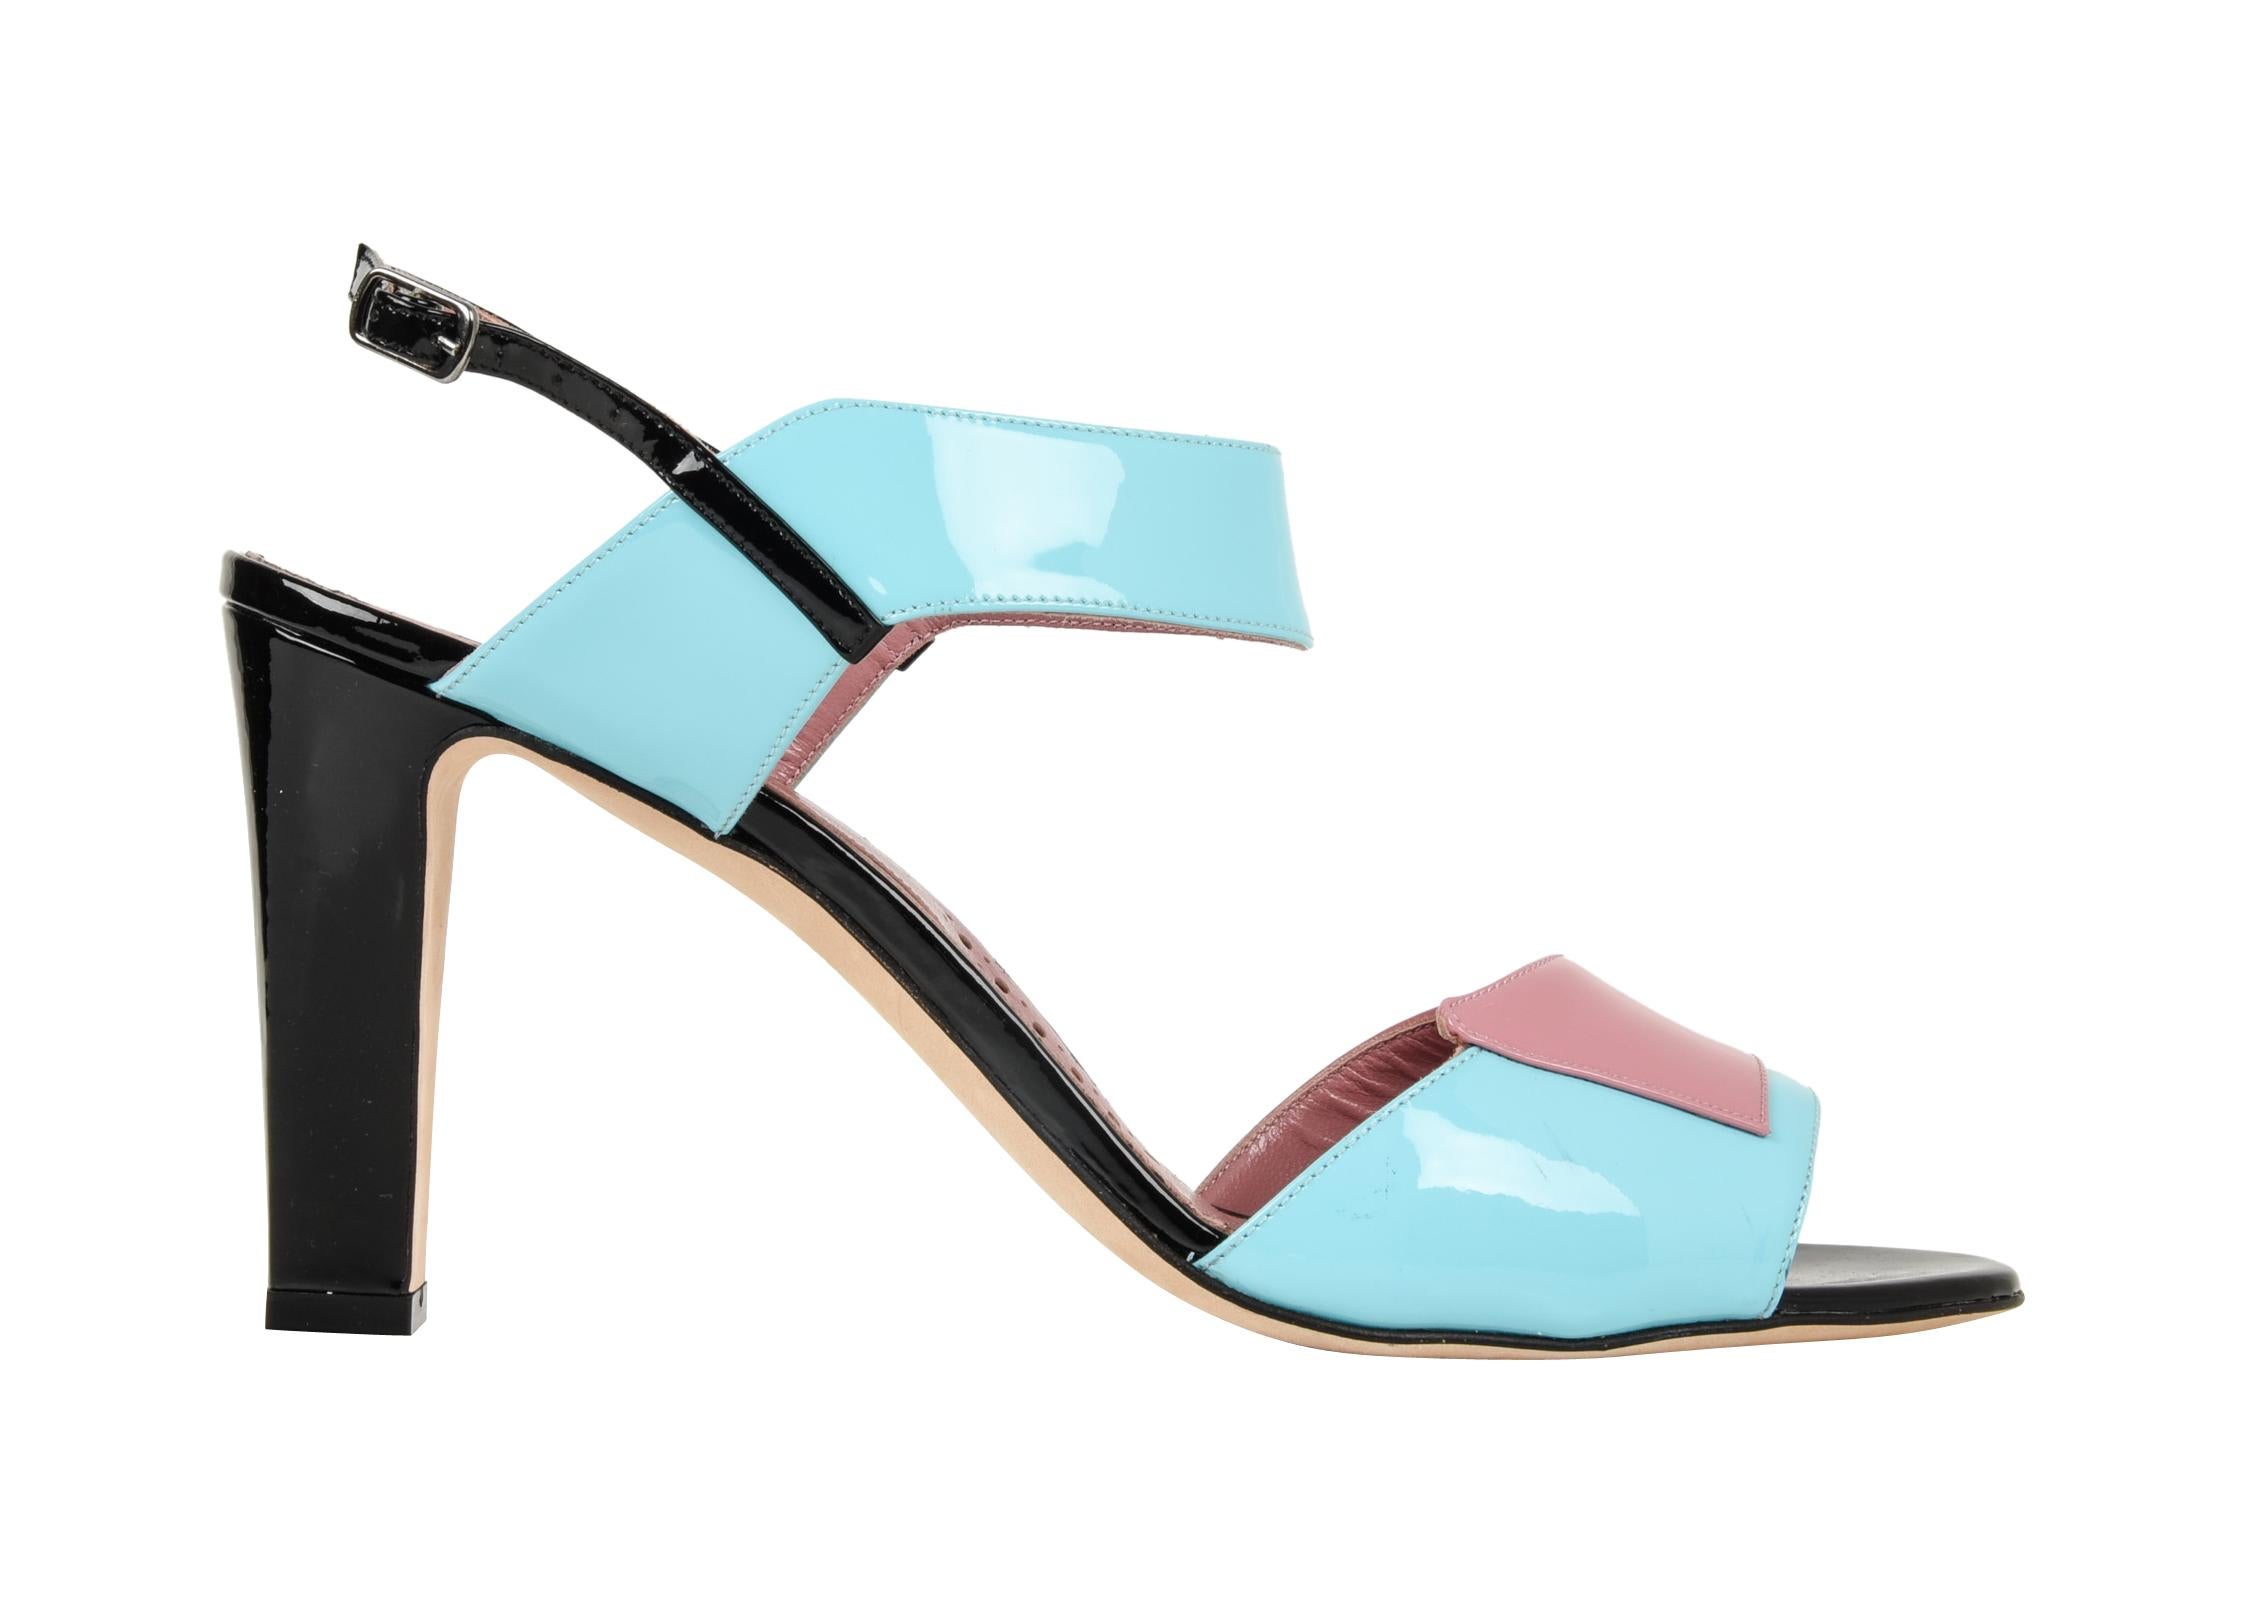 Guaranteed  authentic Manolo Blahnik lovely summer patent leather sandal Deco inspired. 
Light blue, dusty pink and black combined with the architectural details makes you think Deco!
Modified block heel for all day comfort.
NEW or NEVER WORN
Comes